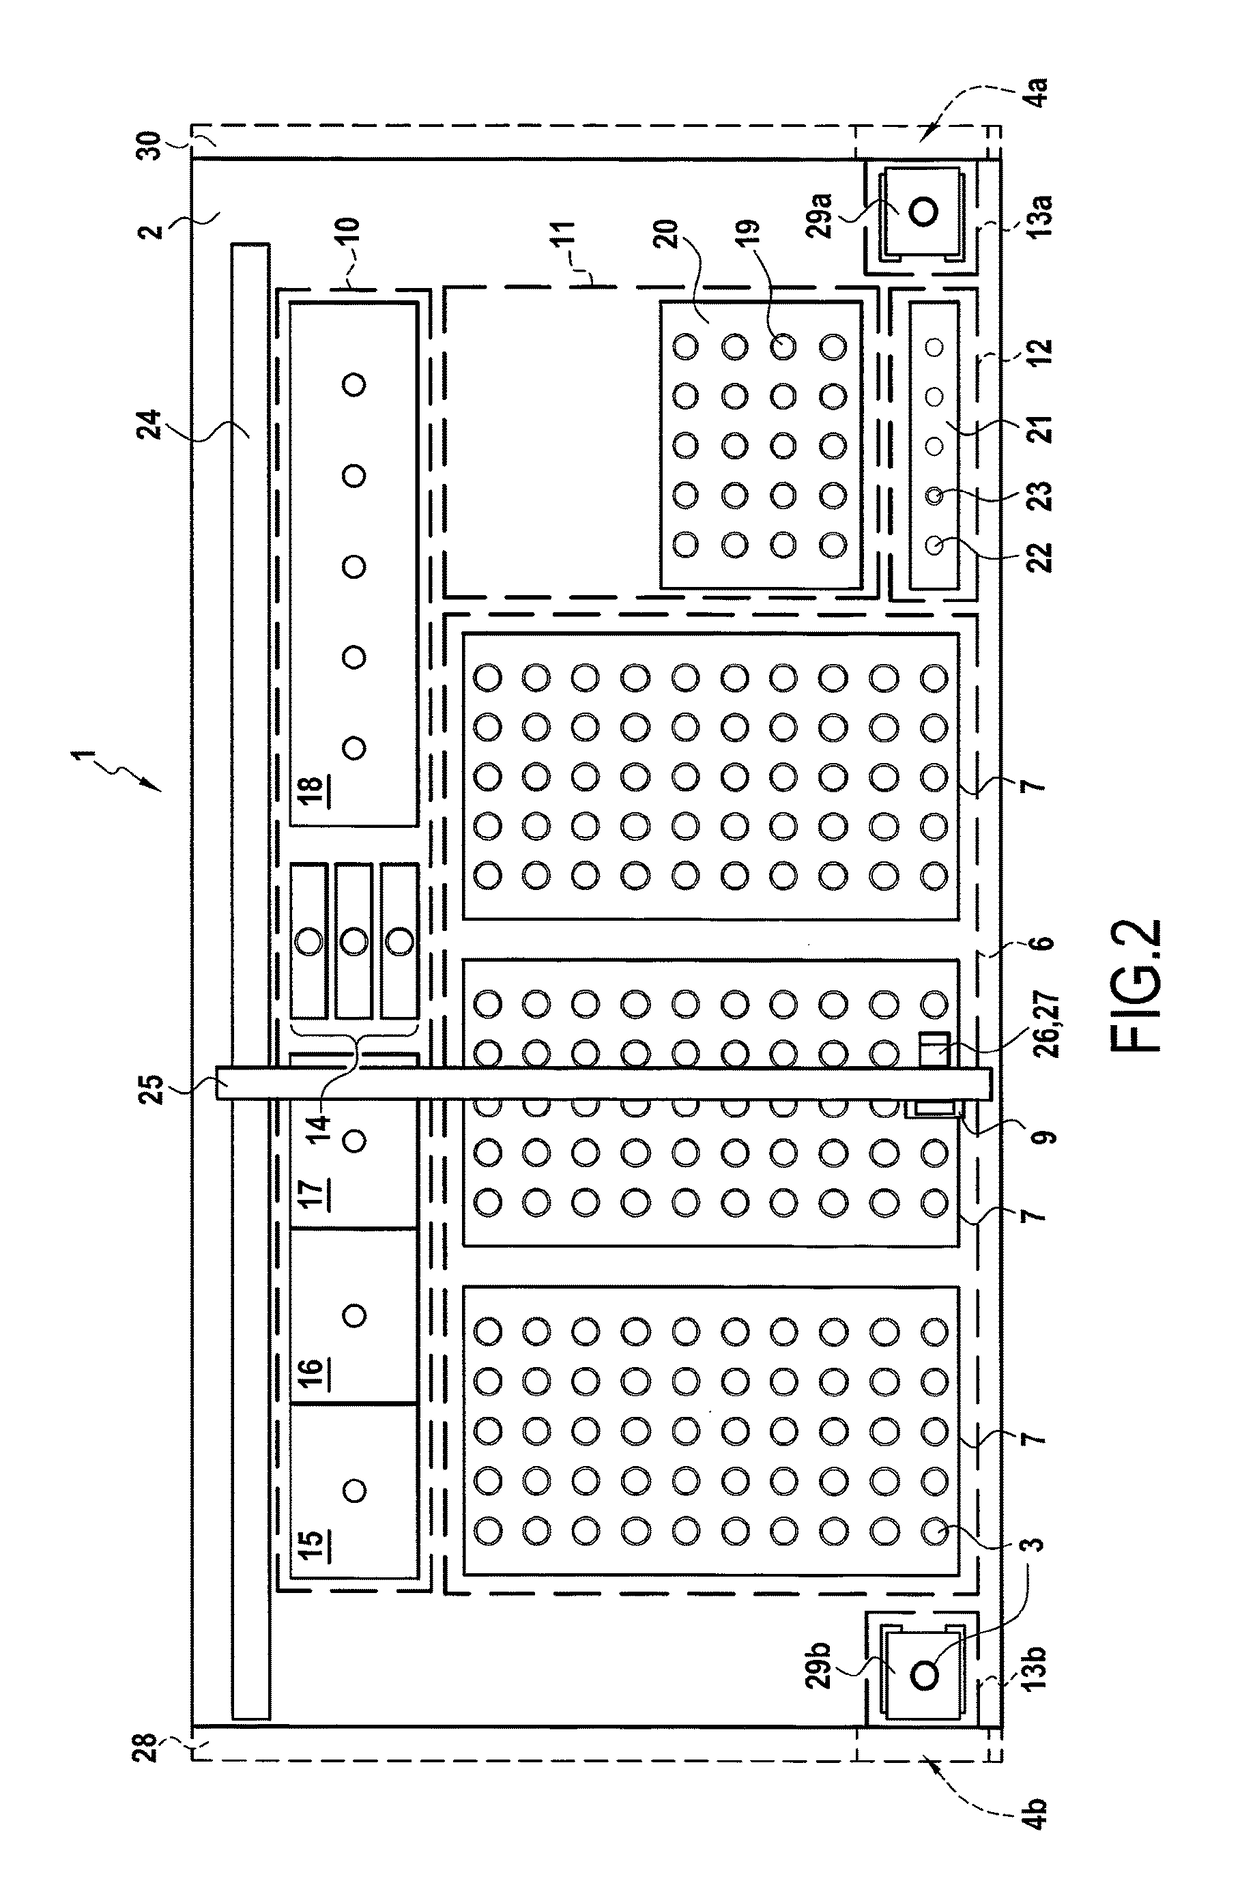 Automatic method of preparing samples of total blood for analysis, and an automatic device for implementing the method